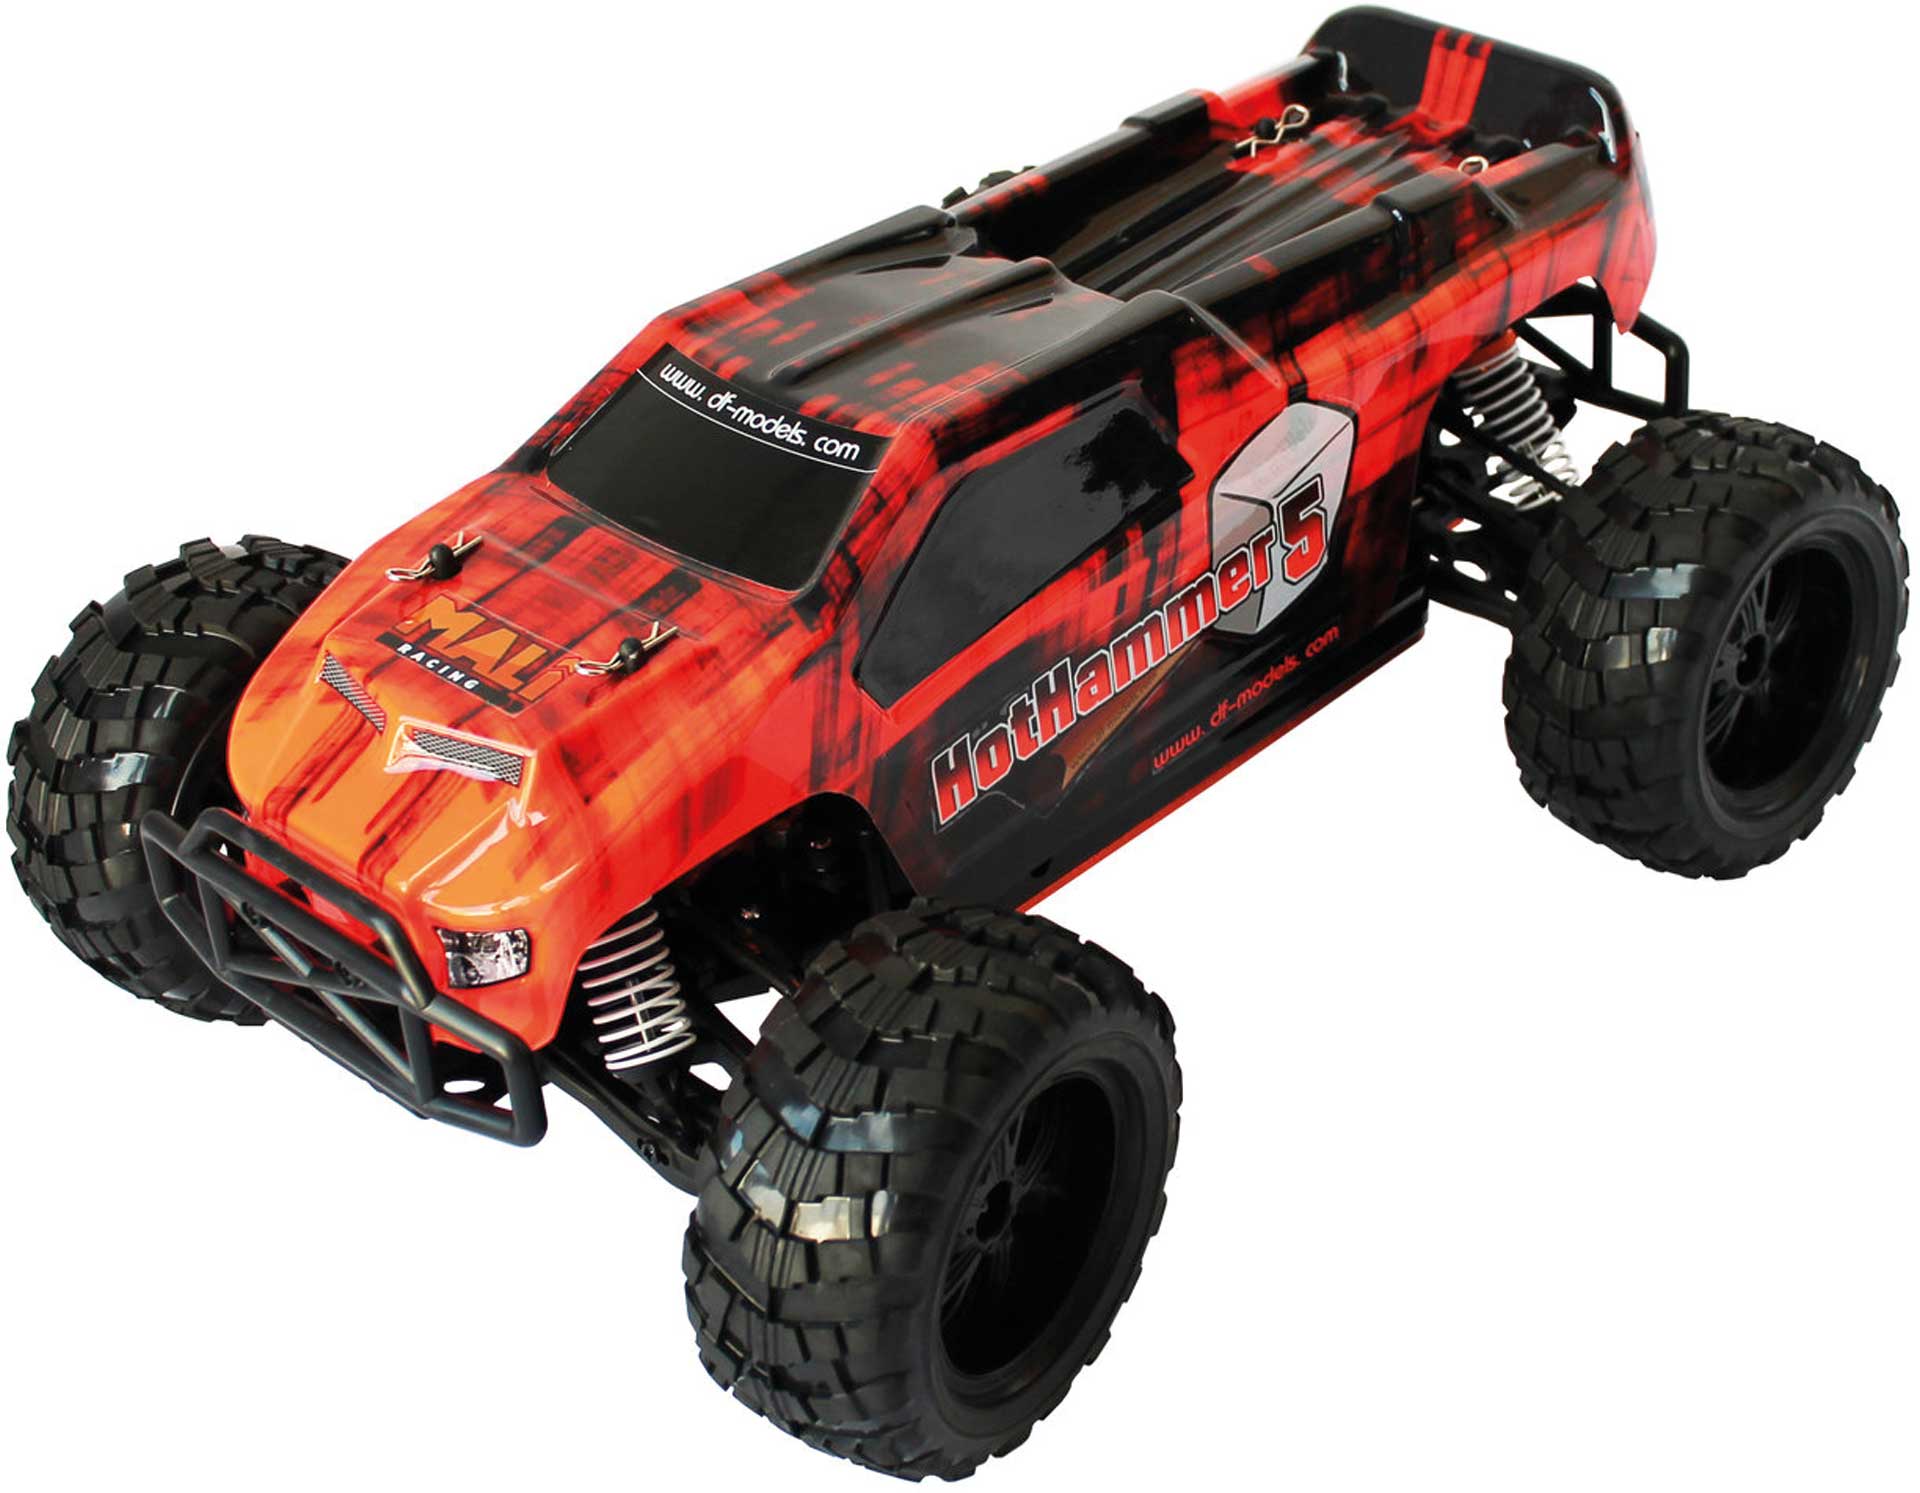 DRIVE & FLY MODELS HOTHAMMER 5 TRUCK BRUSHLESS 1/10XL RTR 4WD